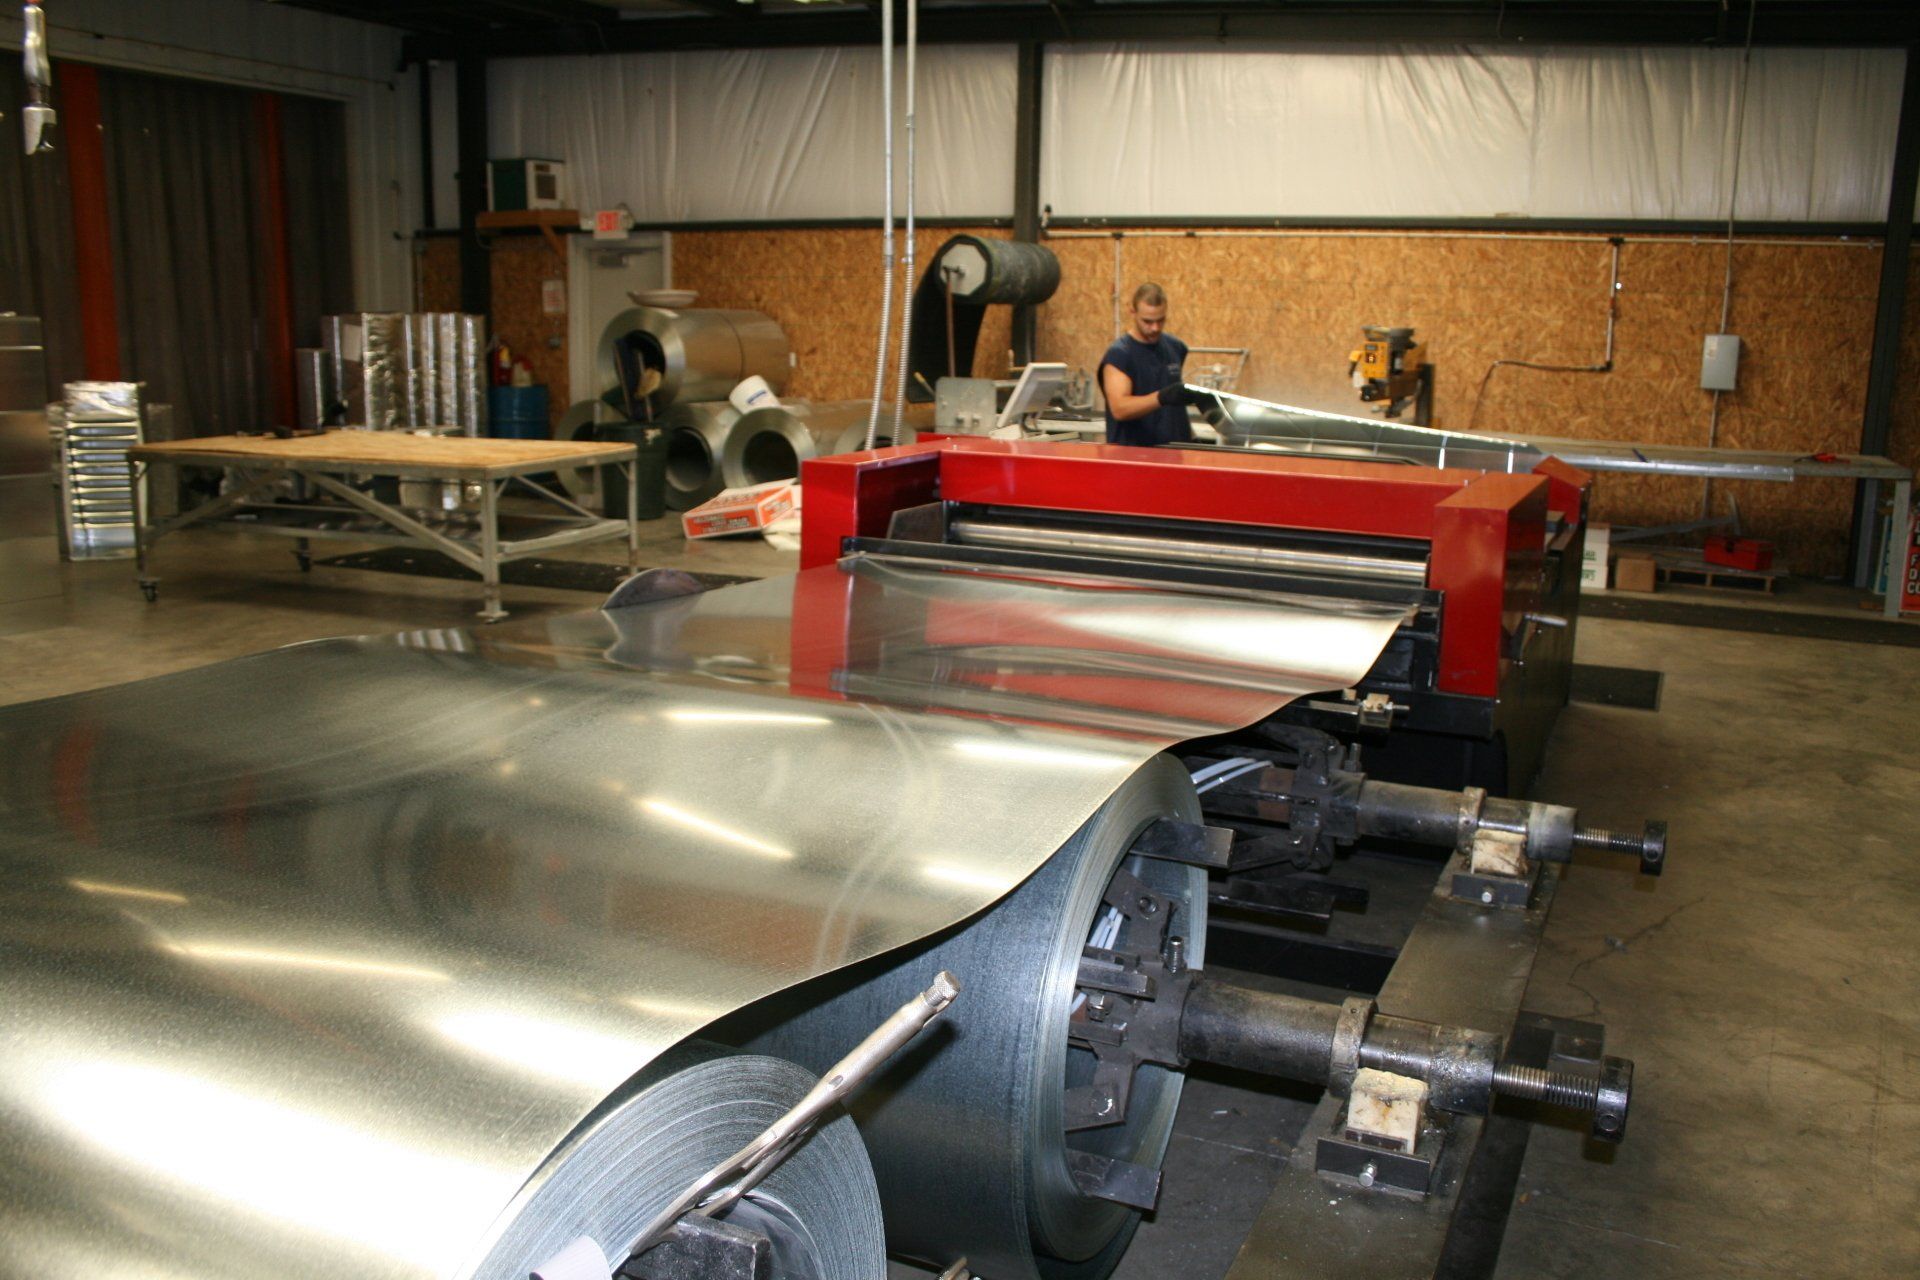 A man is standing in front of a machine that is cutting a piece of metal.